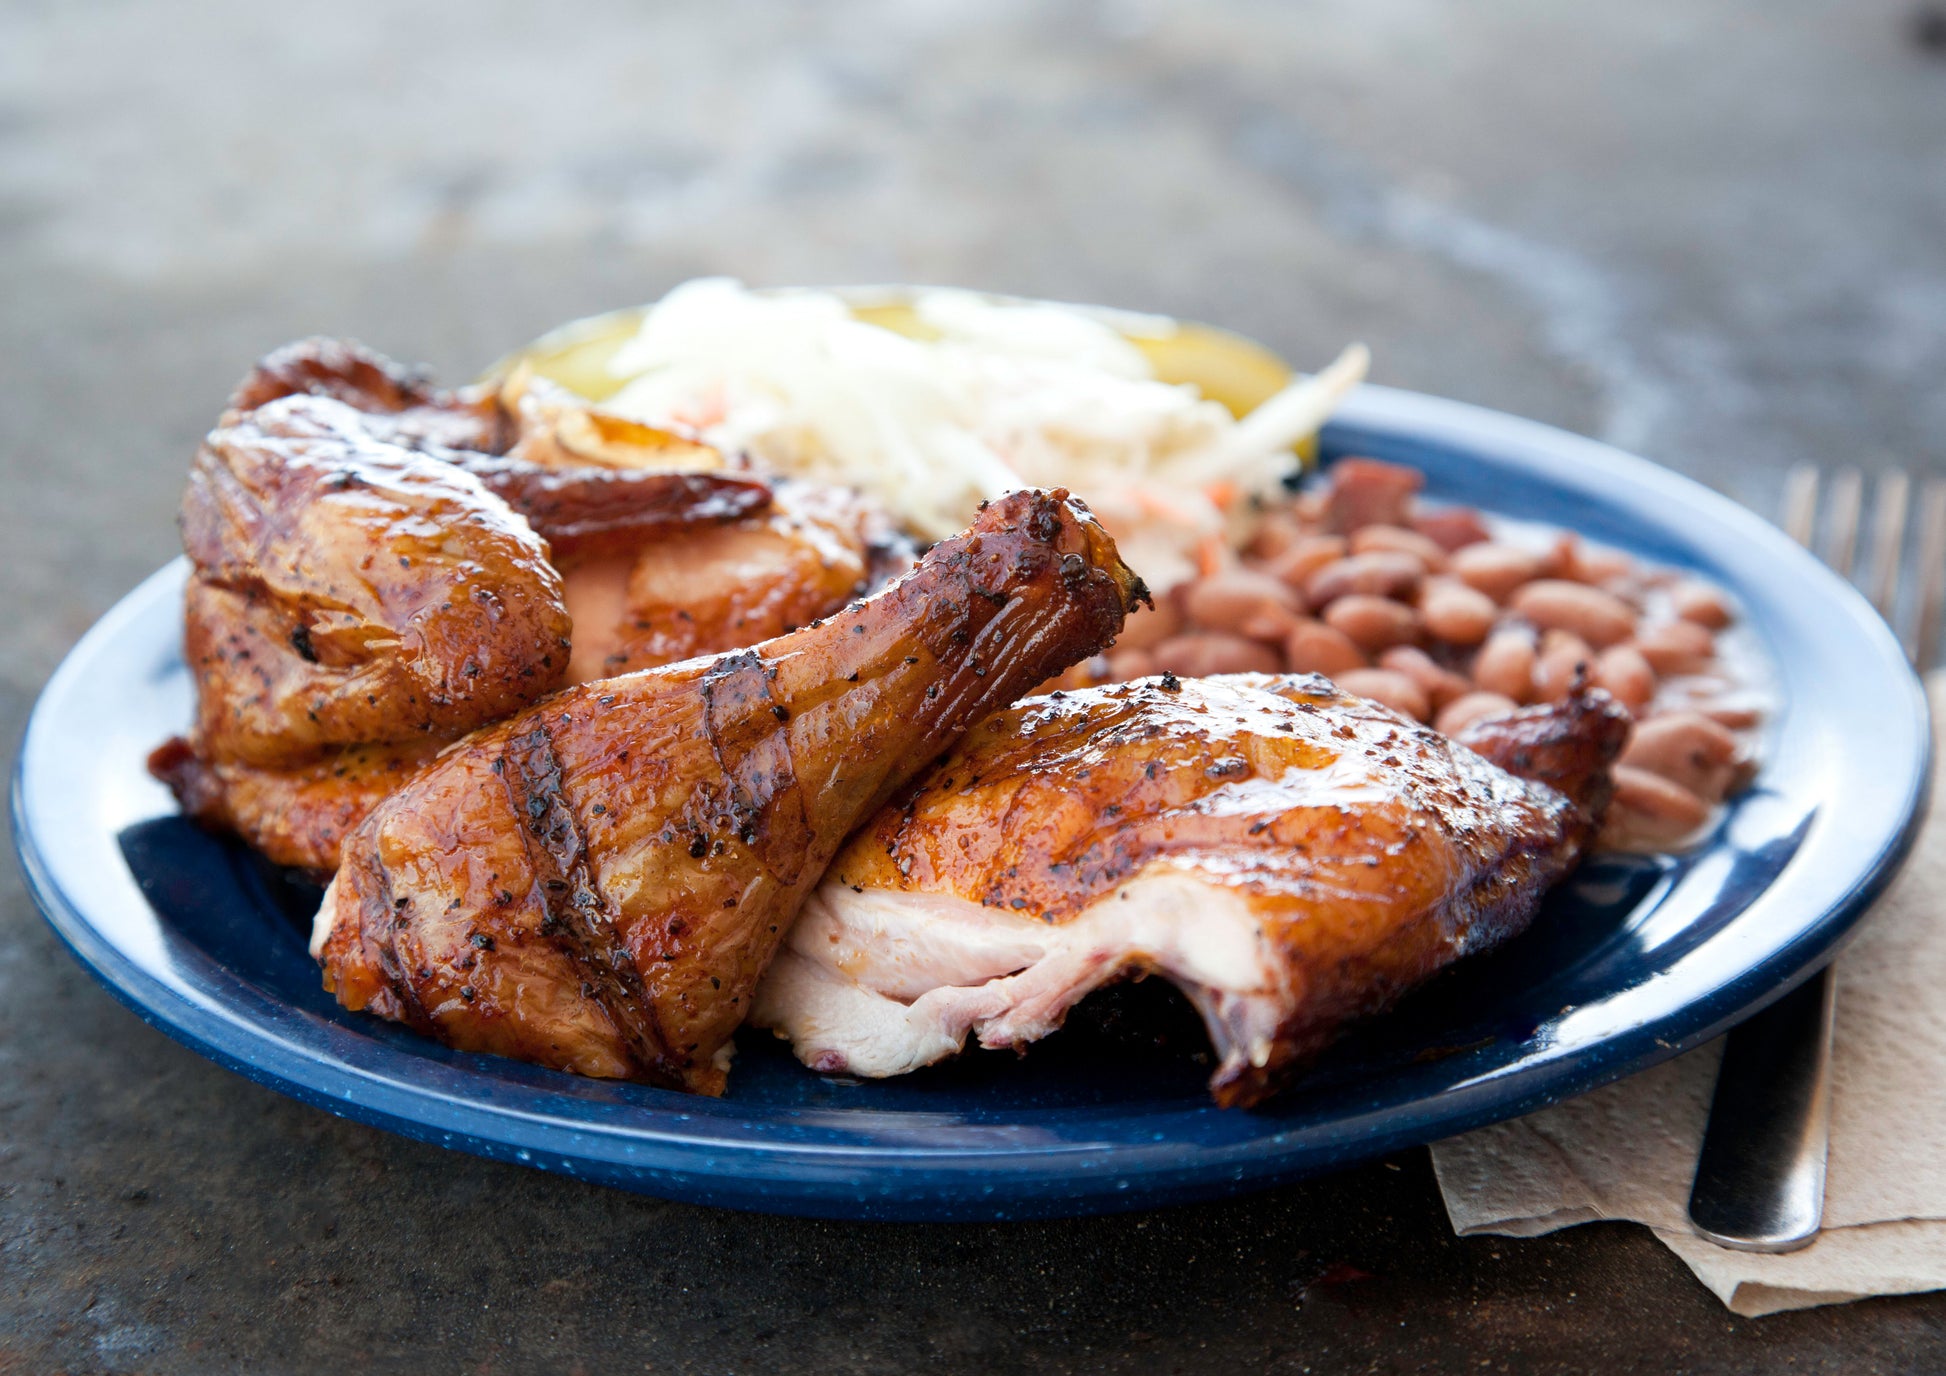 Smoked Half Chicken Barbeque Plate